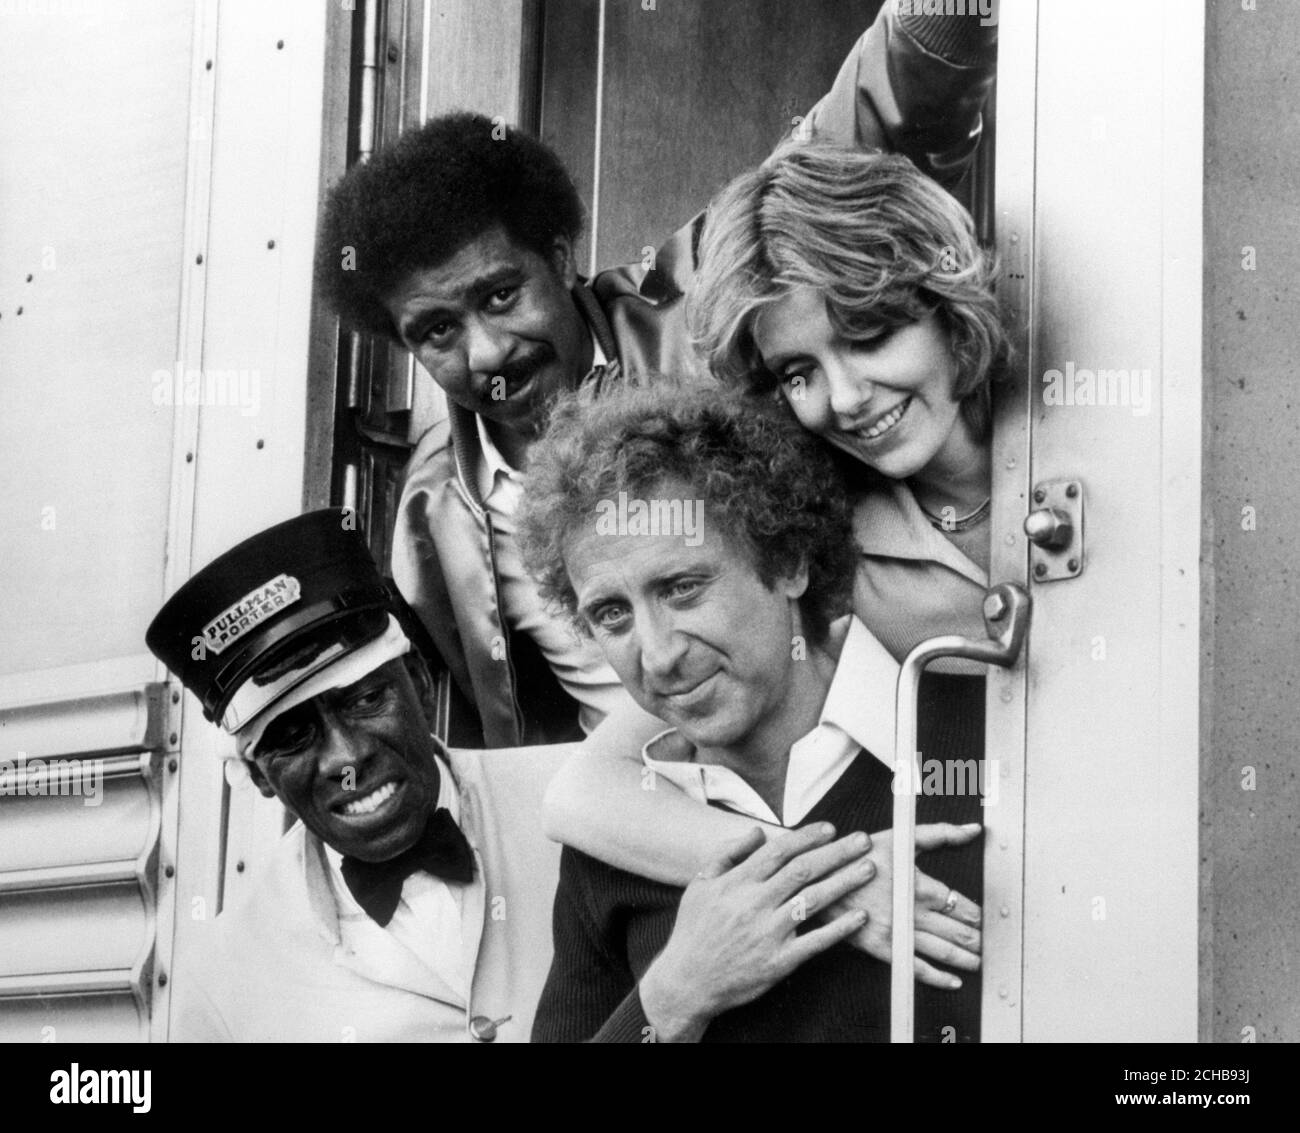 Riding the rails on a mad adventure in 'Silver Streak' are (l-r) Scatman Crothers, Richard Pryor, Gene Wilder and Jill Clayburgh in a comedy set aboard a luxury train between Los Angeles and Chicago. Stock Photo